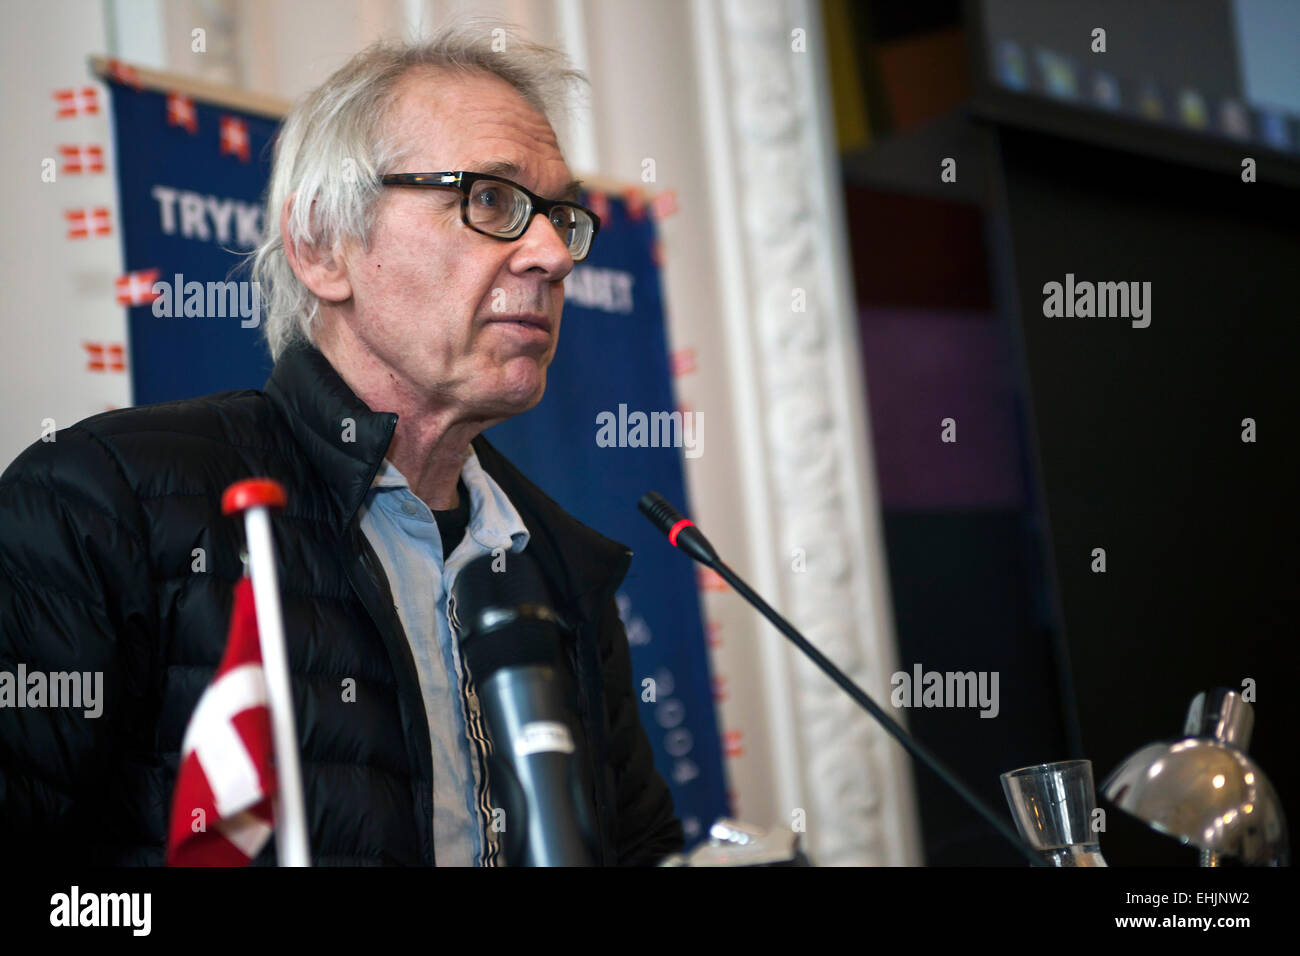 Copenhagen, Denmark, March 14, 2015: Lars Vilks, Swedish cartoonist picturing Mohammed as a dog, receives The Free Press Society’s SAPPHO award in Copenhagen. Motivation for the ward was: “Vilks brings together journalistic excellence with fearlessness and uncompromising attutude Stock Photo